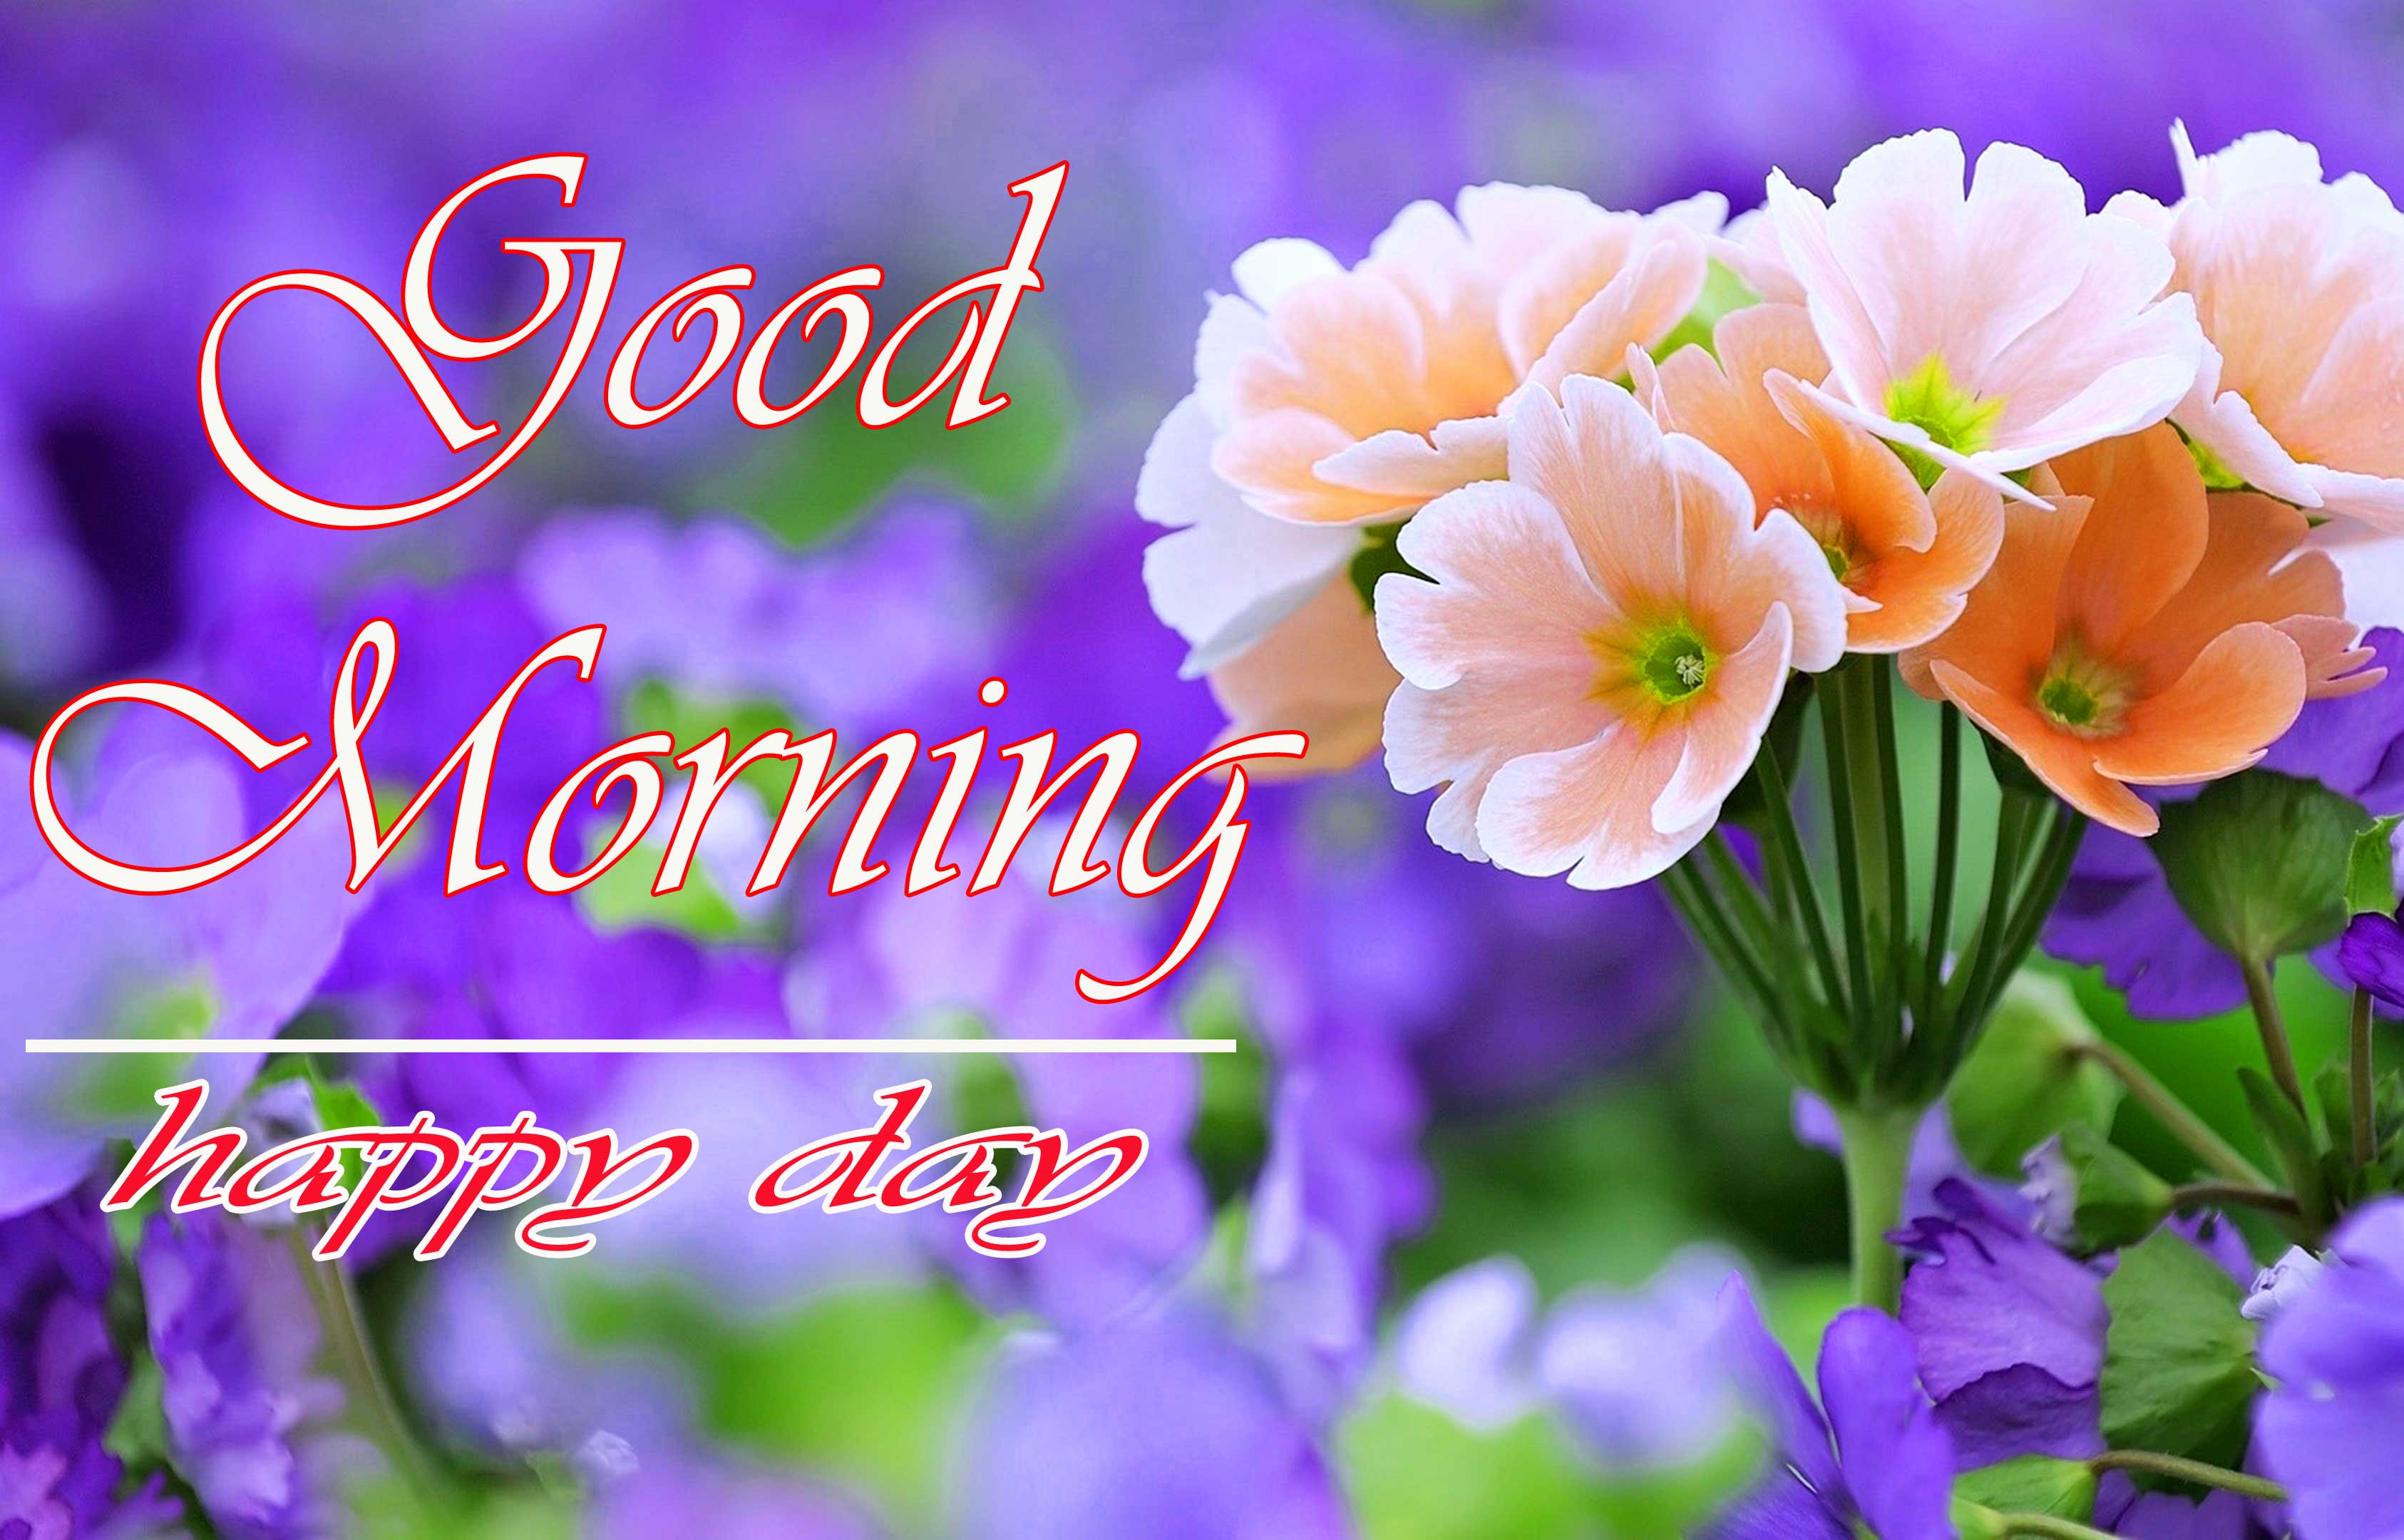 With Flower Good Morning Images pics Download 